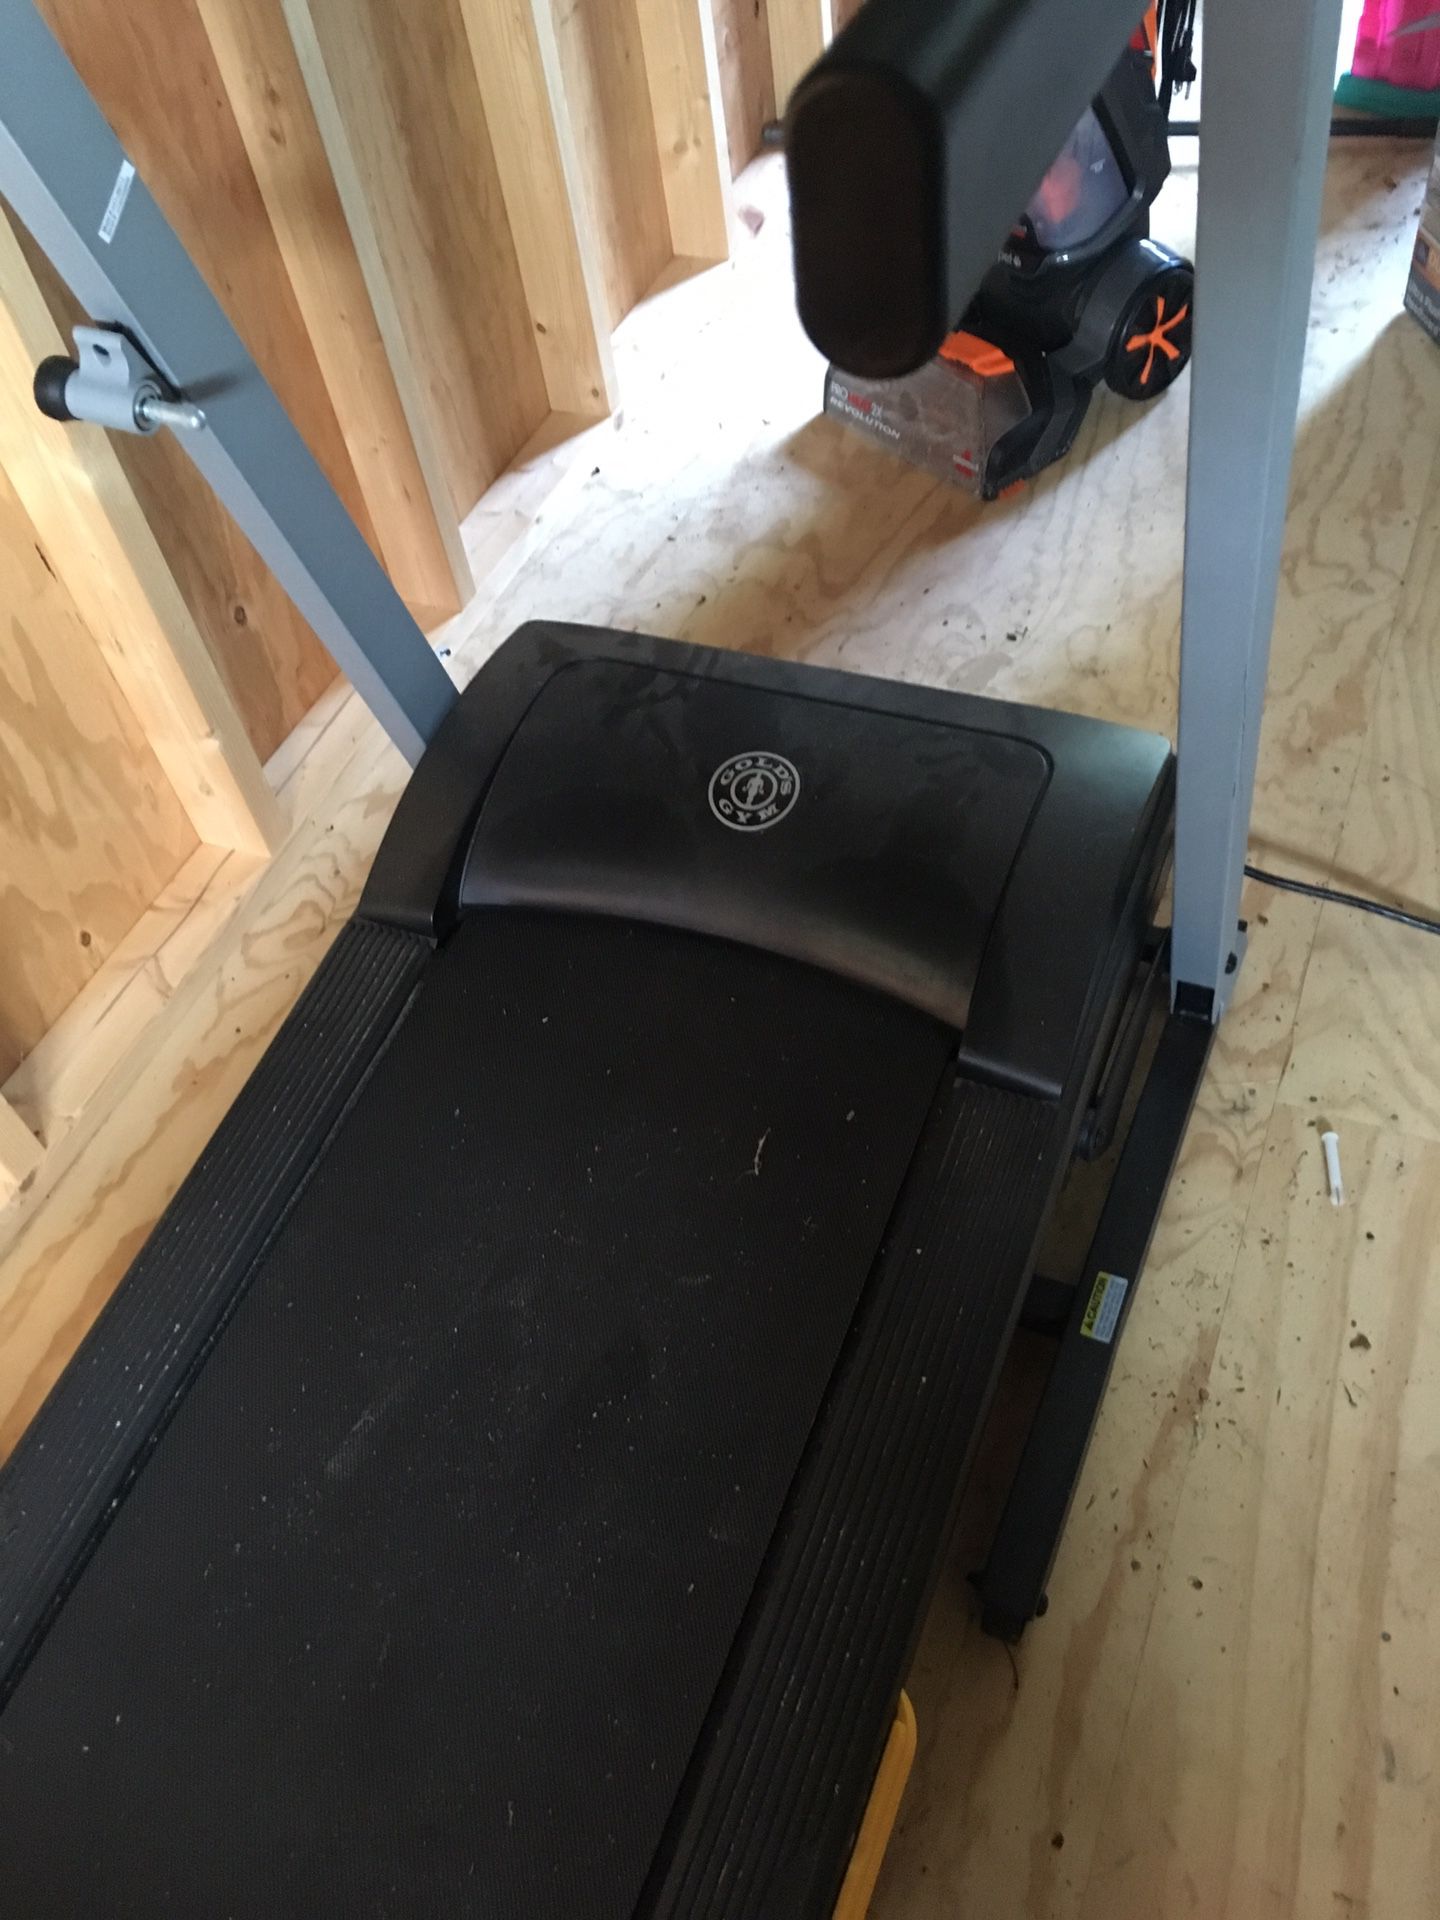 Golds Gym Treadmill in excellent condition. 275.00 dollars